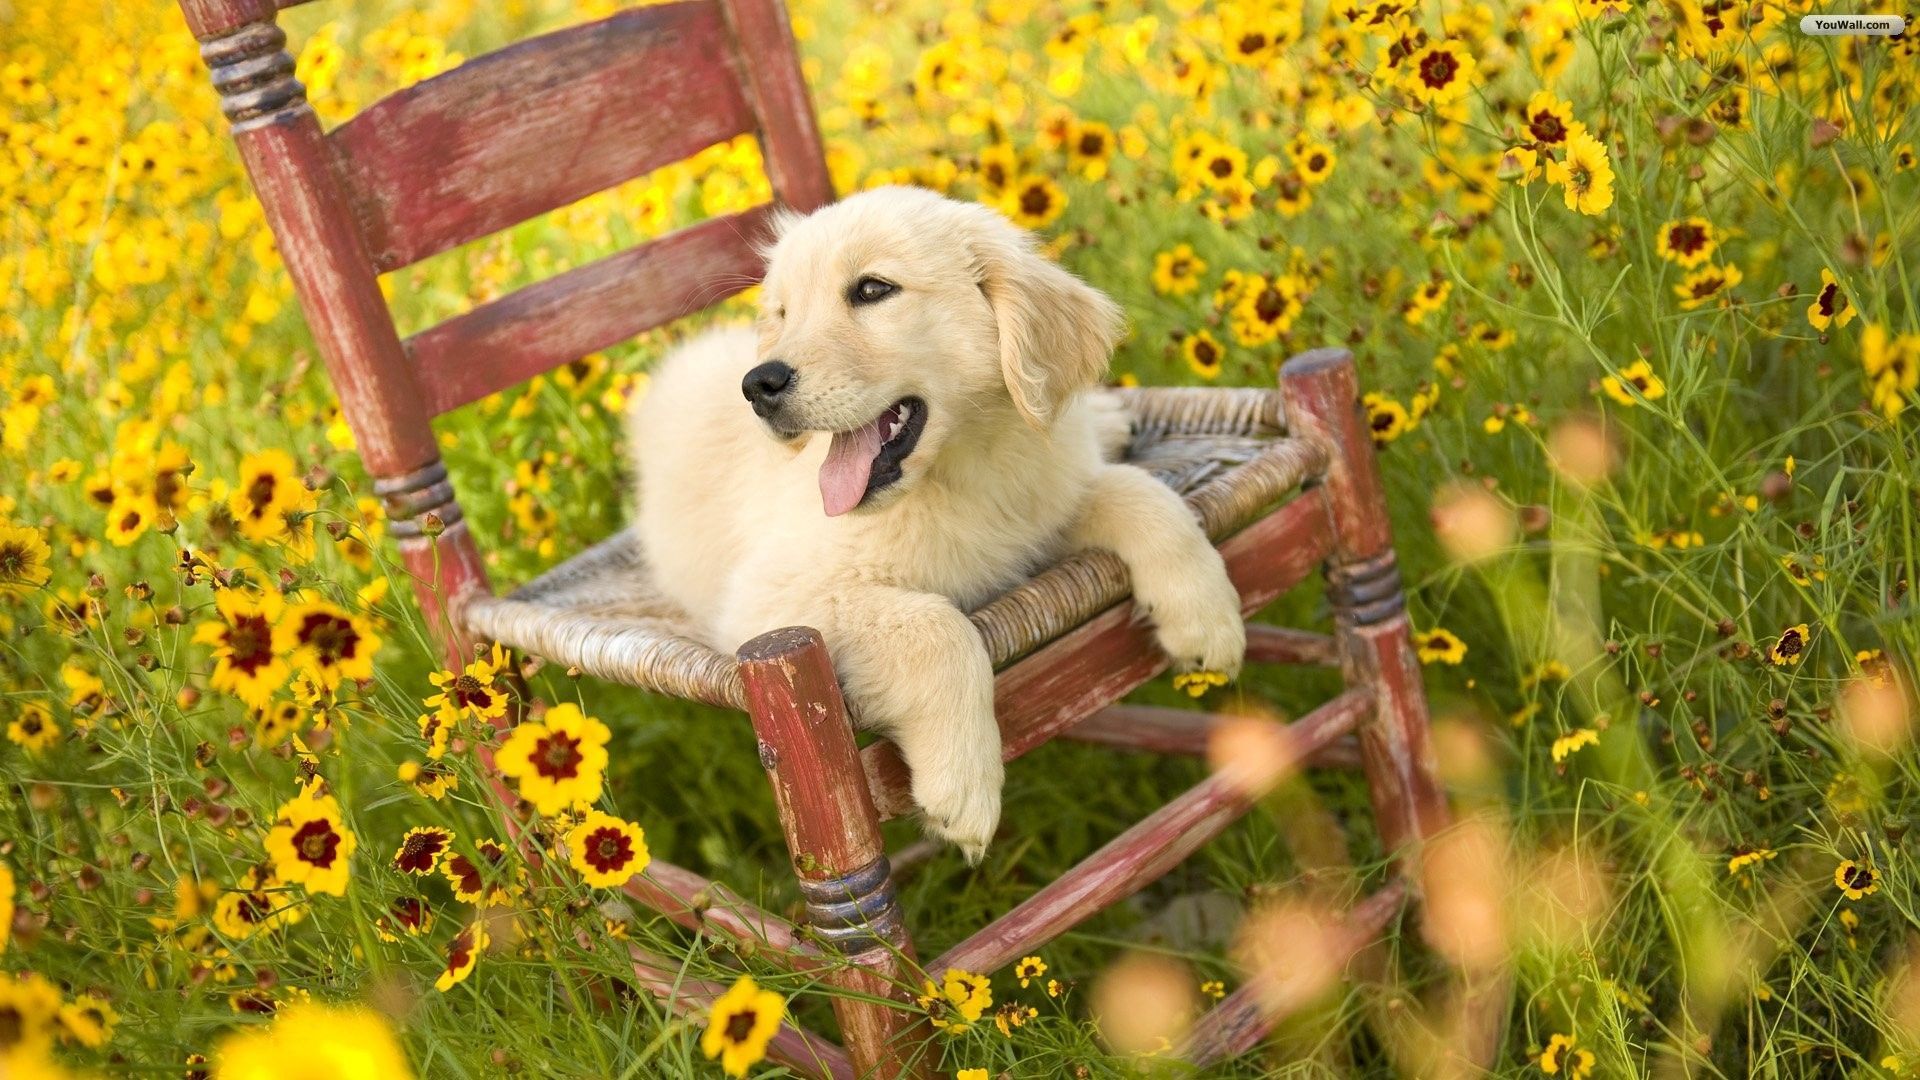 Flowers and Puppies Wallpapers on WallpaperDog